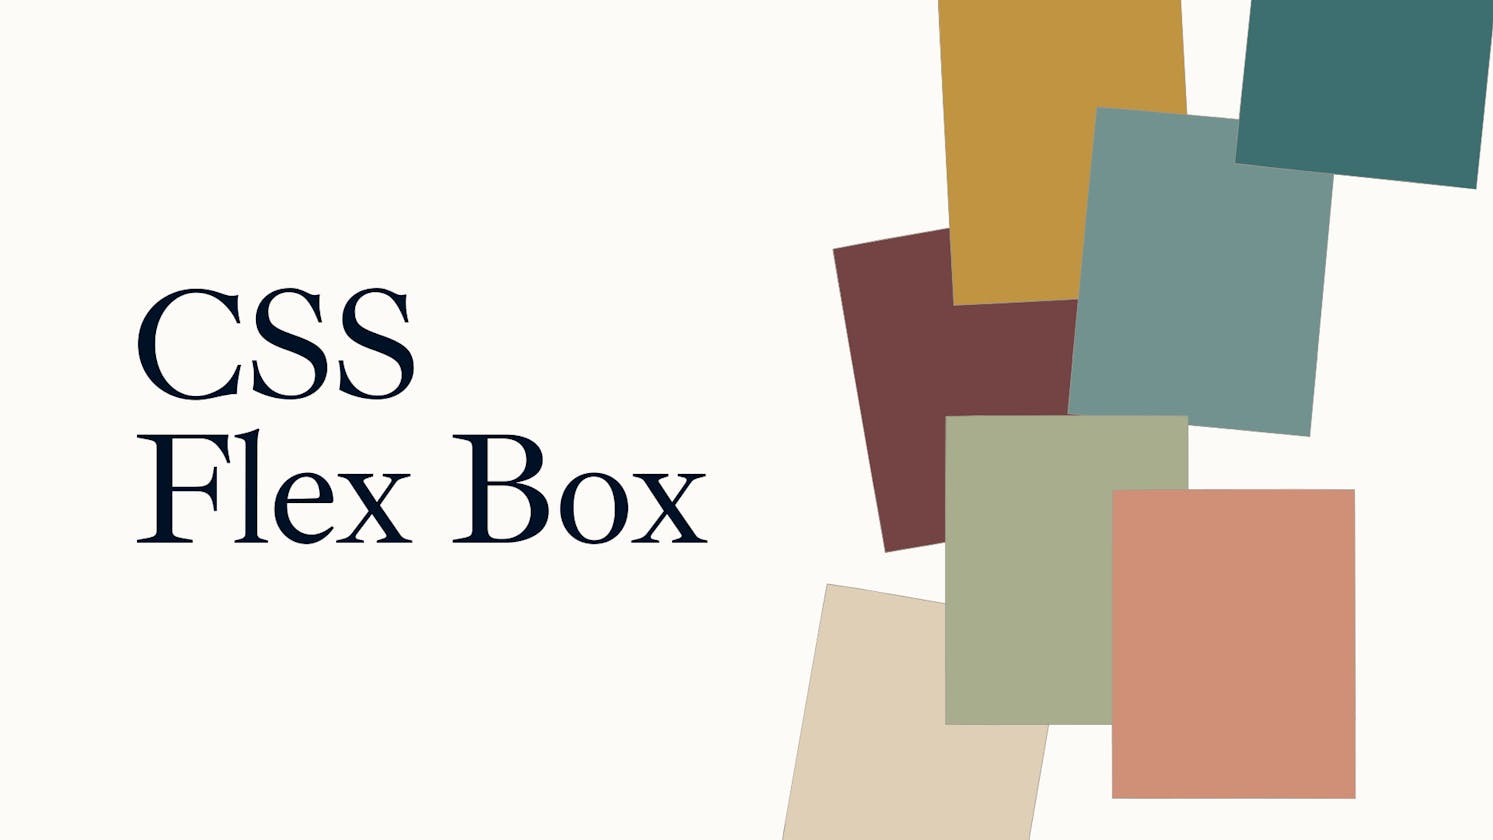 Flexbox Layout in CSS